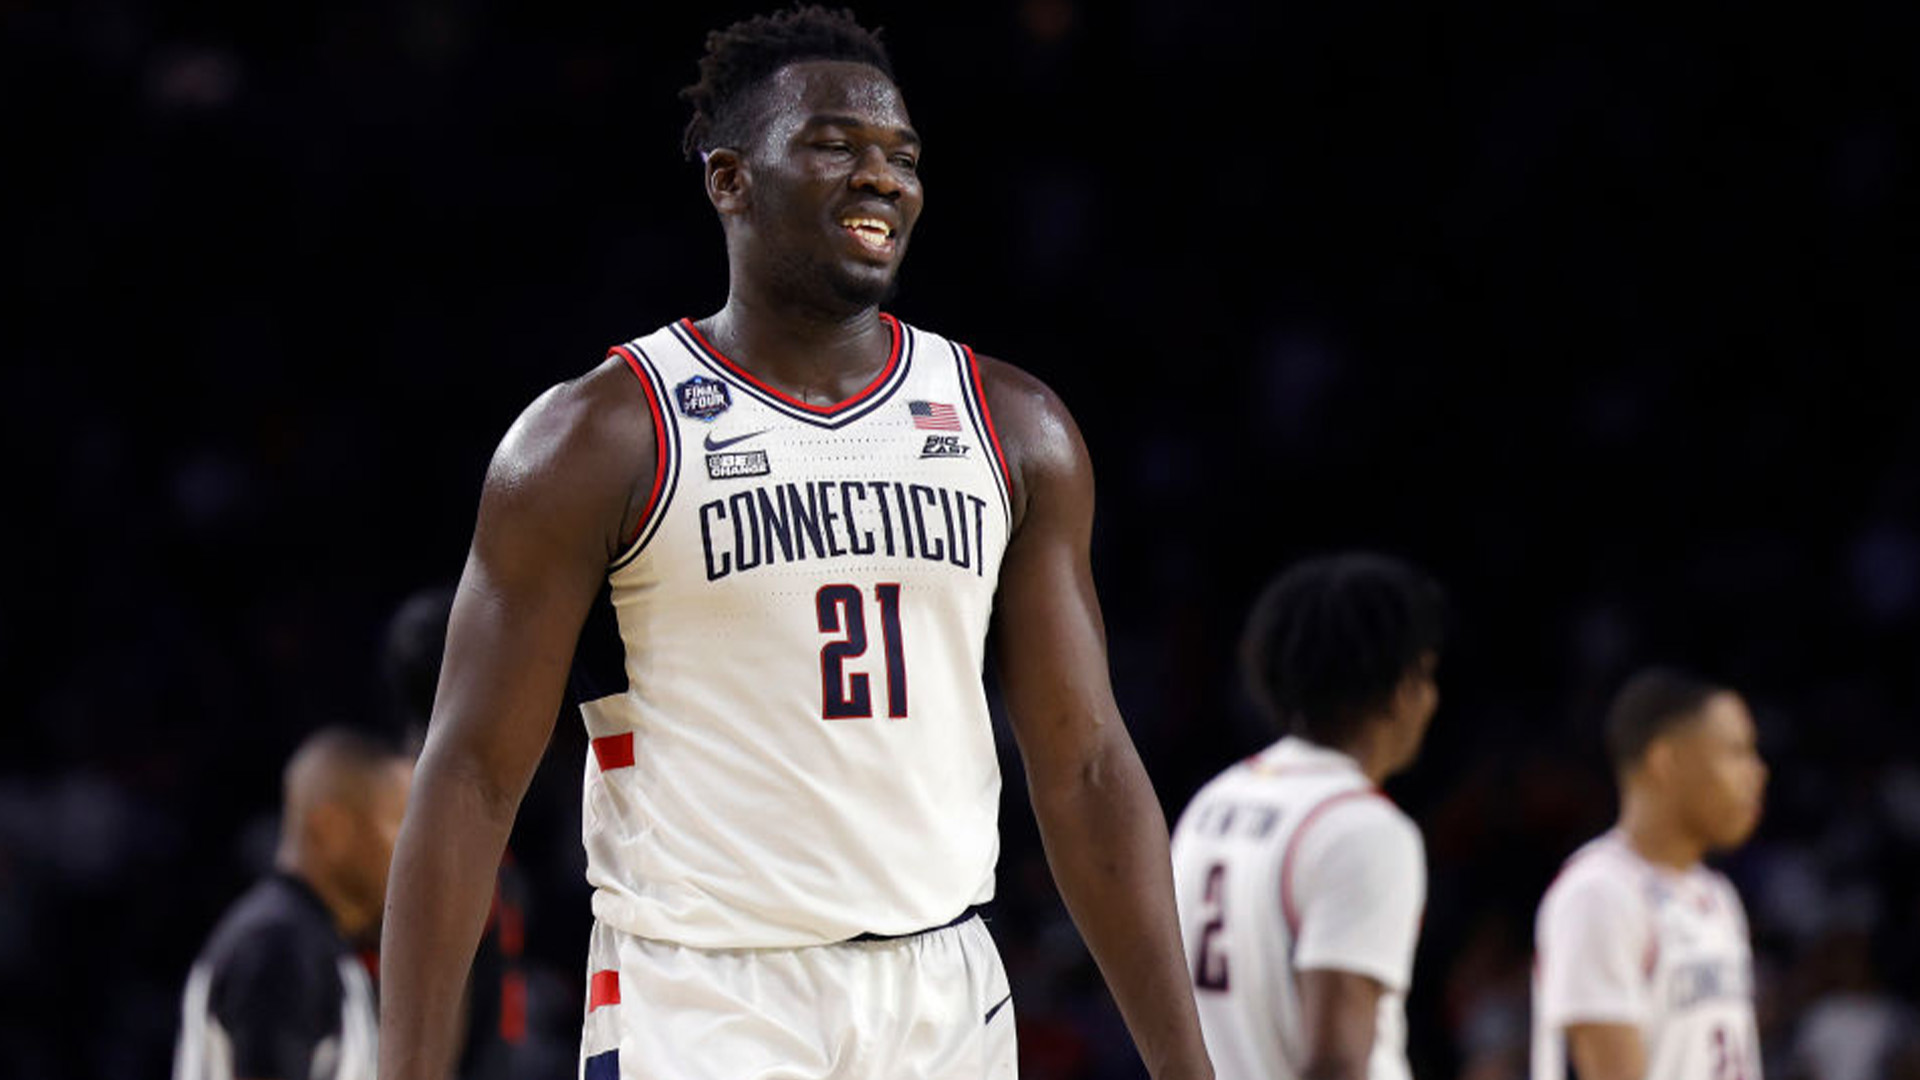 UConn Men's Basketball Player Adama Sanogo Inks First NIL Deal Despite Being Ineligible To Turn It Into A Profit As An International Athlete